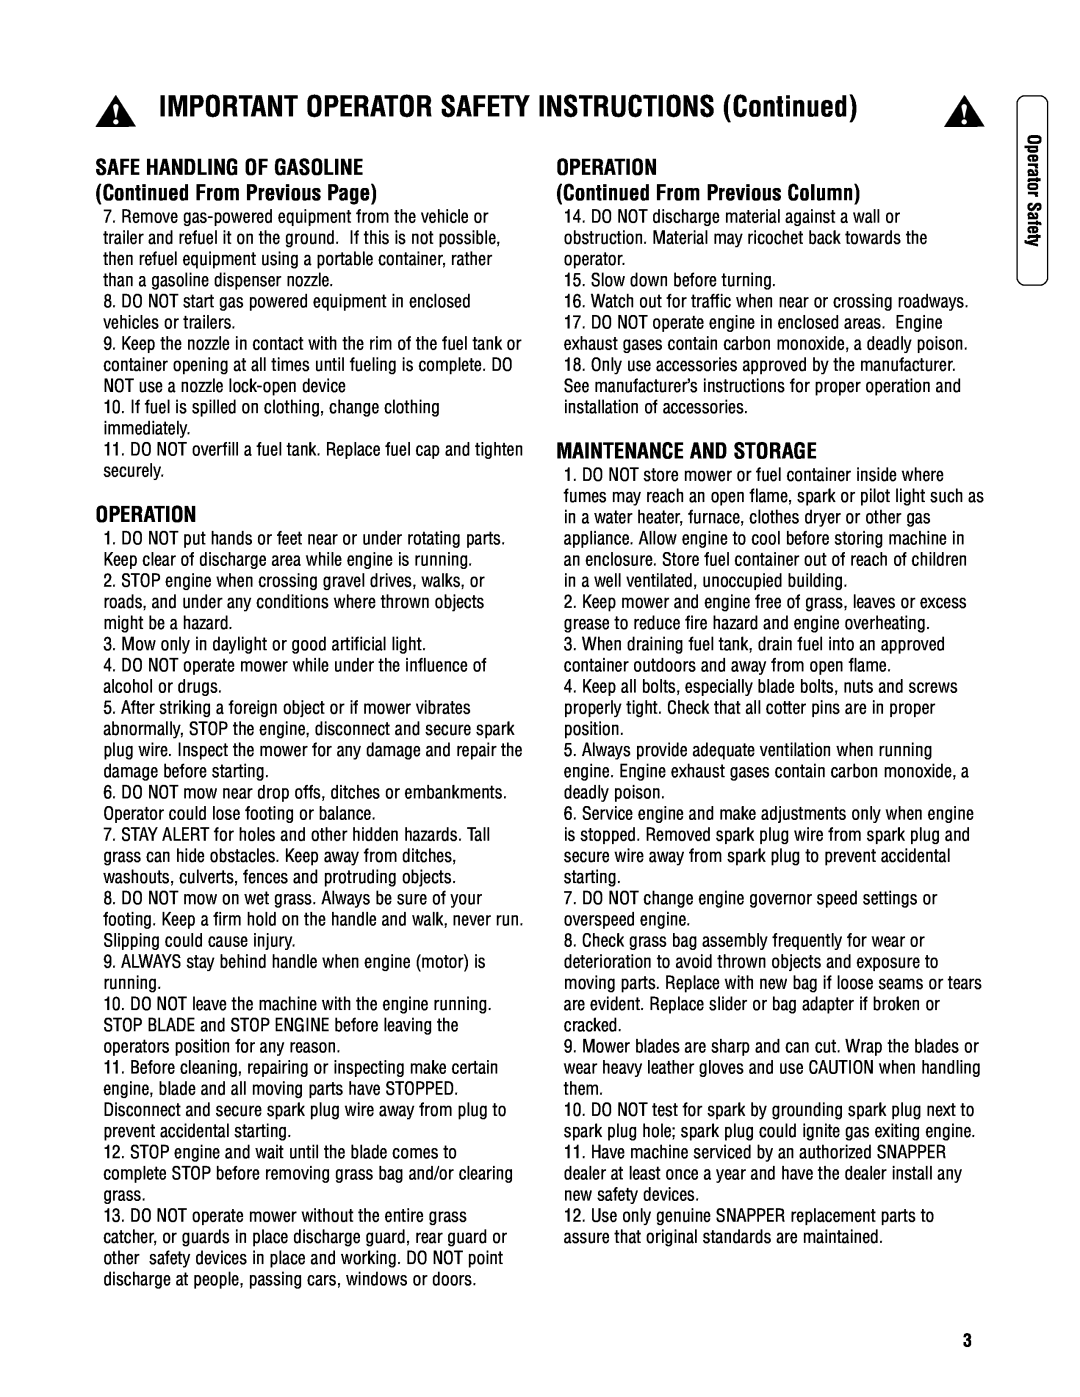 Briggs & Stratton SPVH21675 IMPORTANT OPERATOR SAFETY INSTRUCTIONS Continued, Operation, Maintenance And Storage 